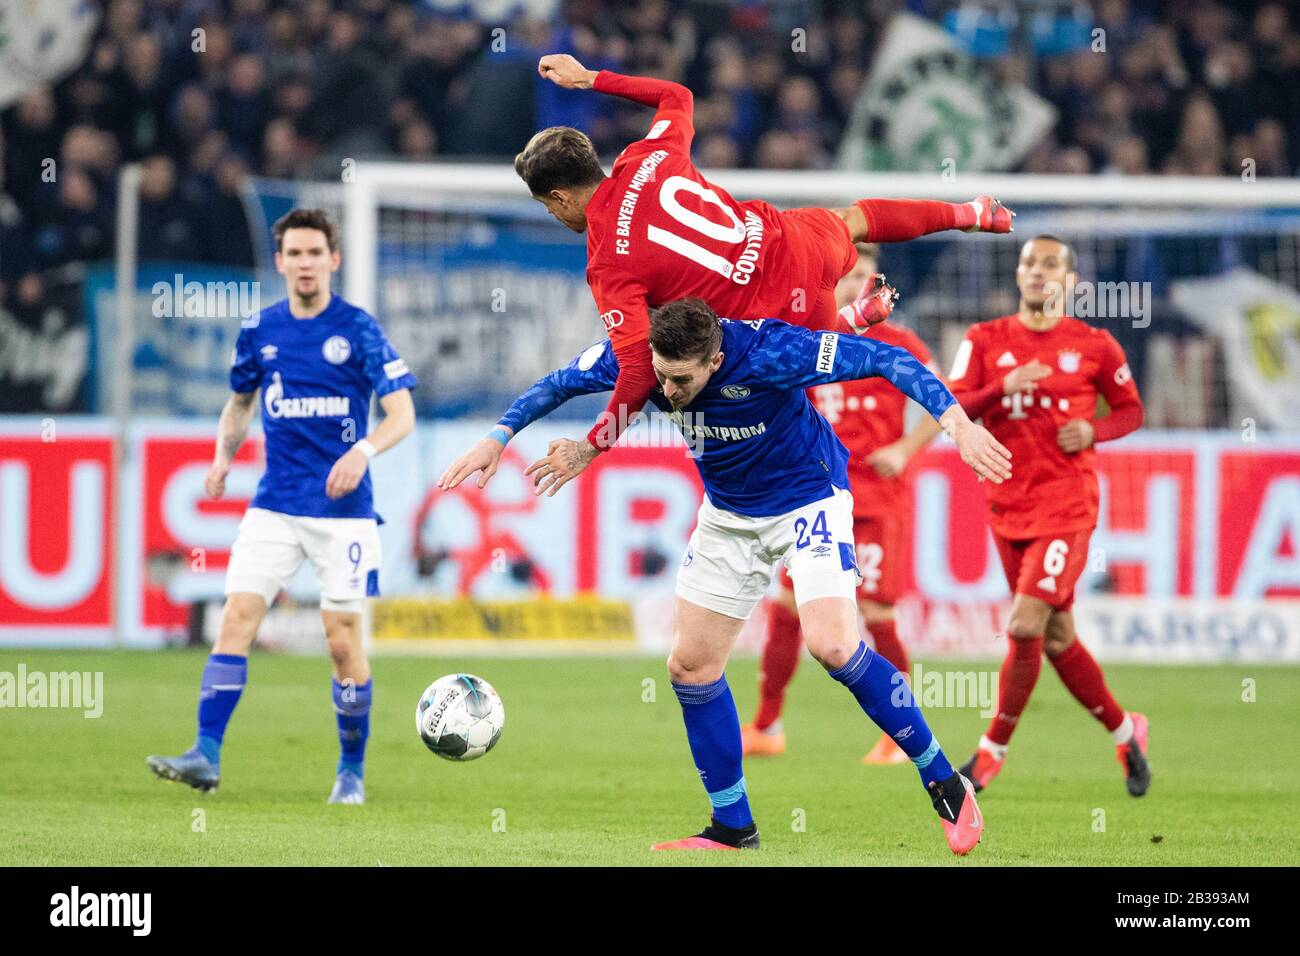 Gelsenkirchen, Germany, Veltins-Arena, 3.03.2020: Bastian Oczipka of Schalke 04 (L) challenges Philippe Coutinho of Muenchen during the cup match DFB Stock Photo